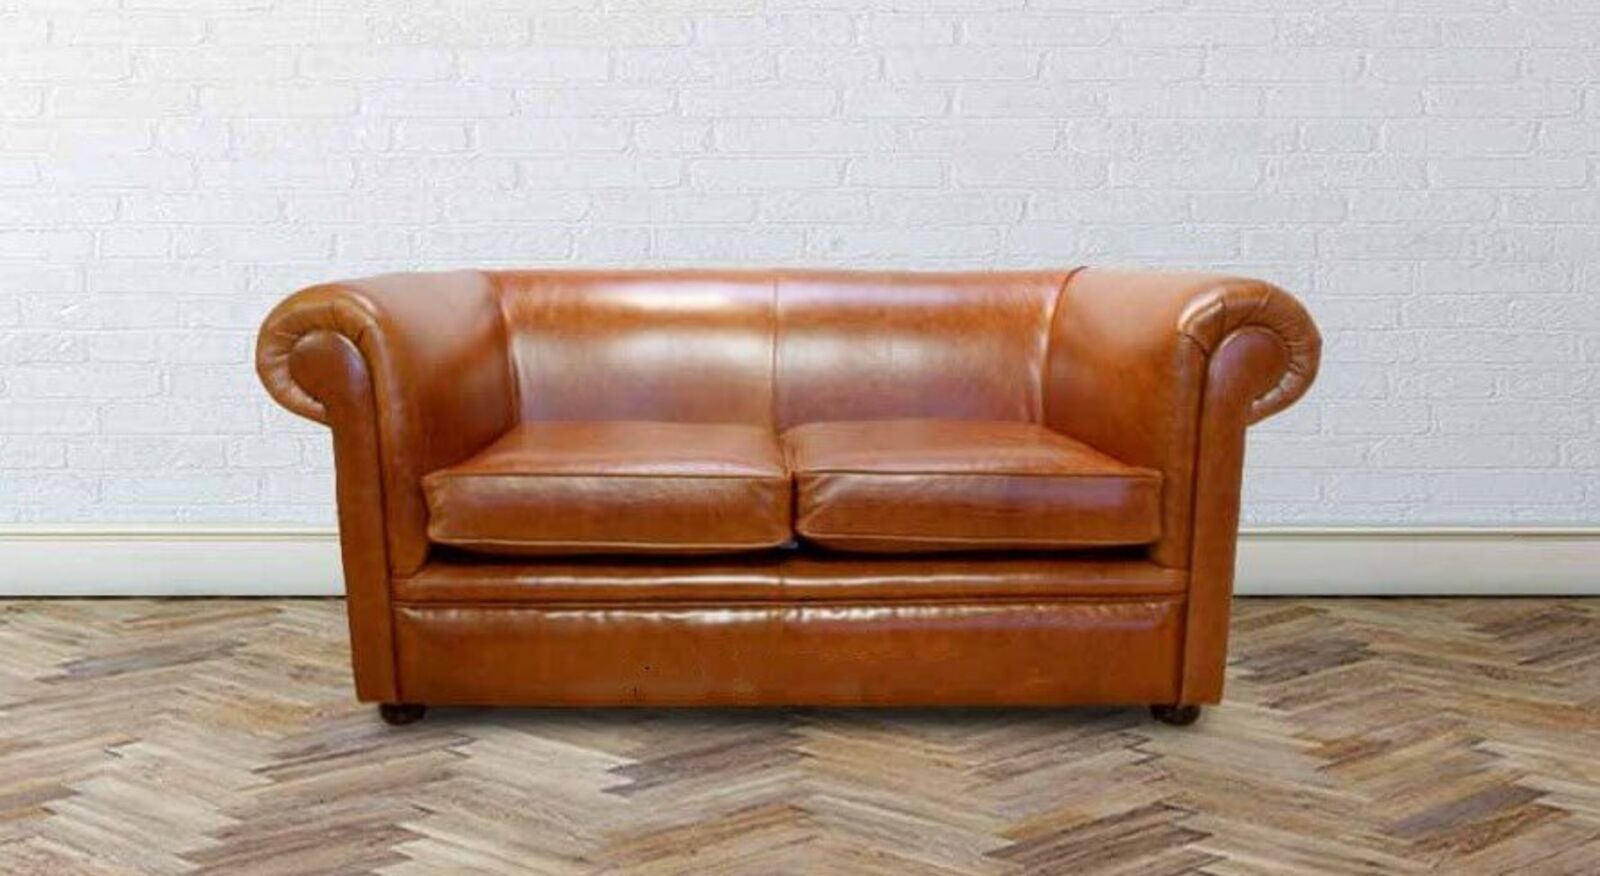 Product photograph of Chesterfield 1930 2 Seater Settee Old English Bruciatto Leather Sofa from Designer Sofas 4U